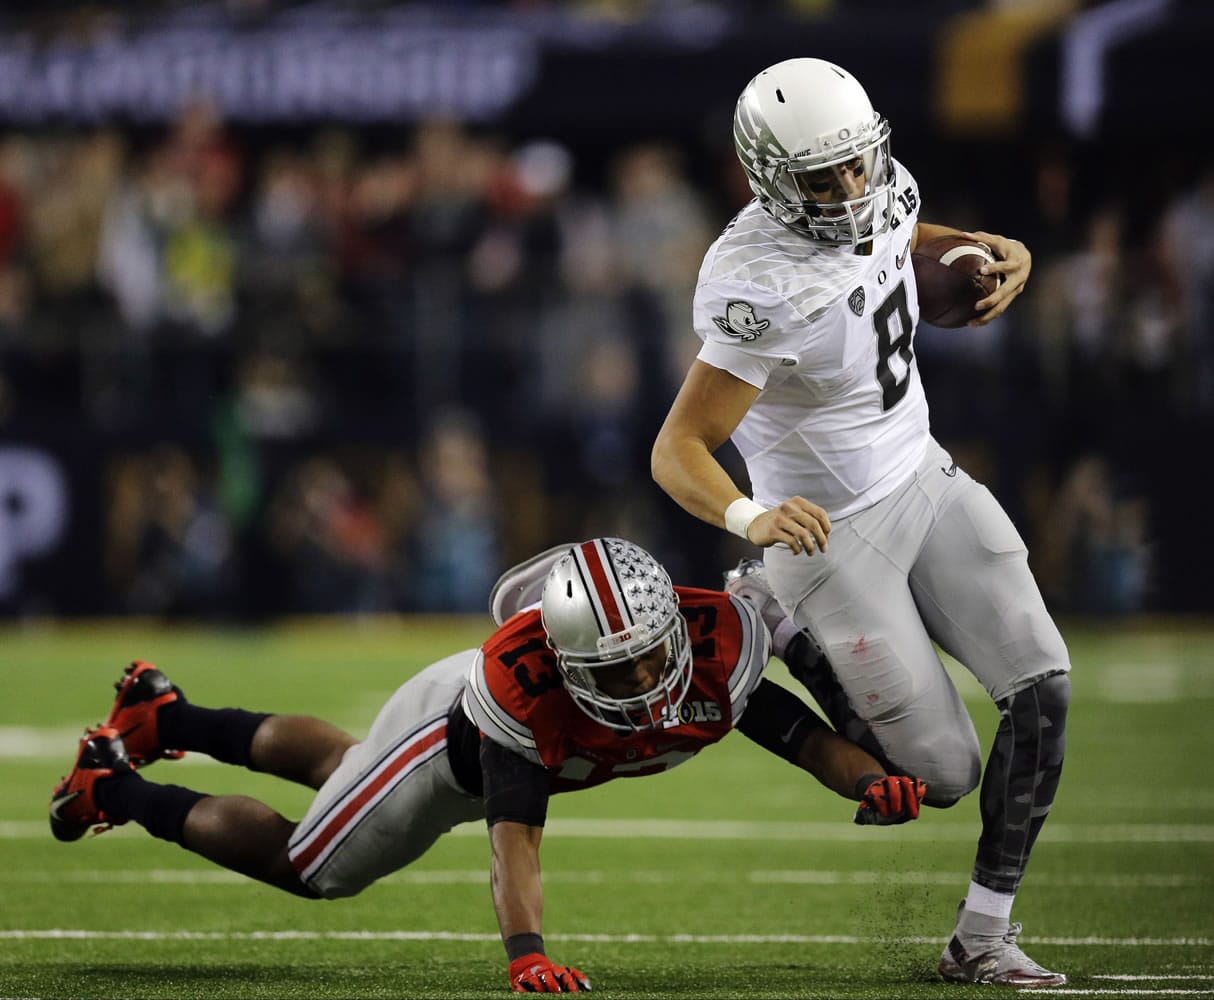 Oregon's Marcus Mariota (8) runs past Ohio State's Eli Apple (13) during the first half of the NCAA college football playoff championship game Monday, Jan. 12, 2015, in Arlington, Texas.